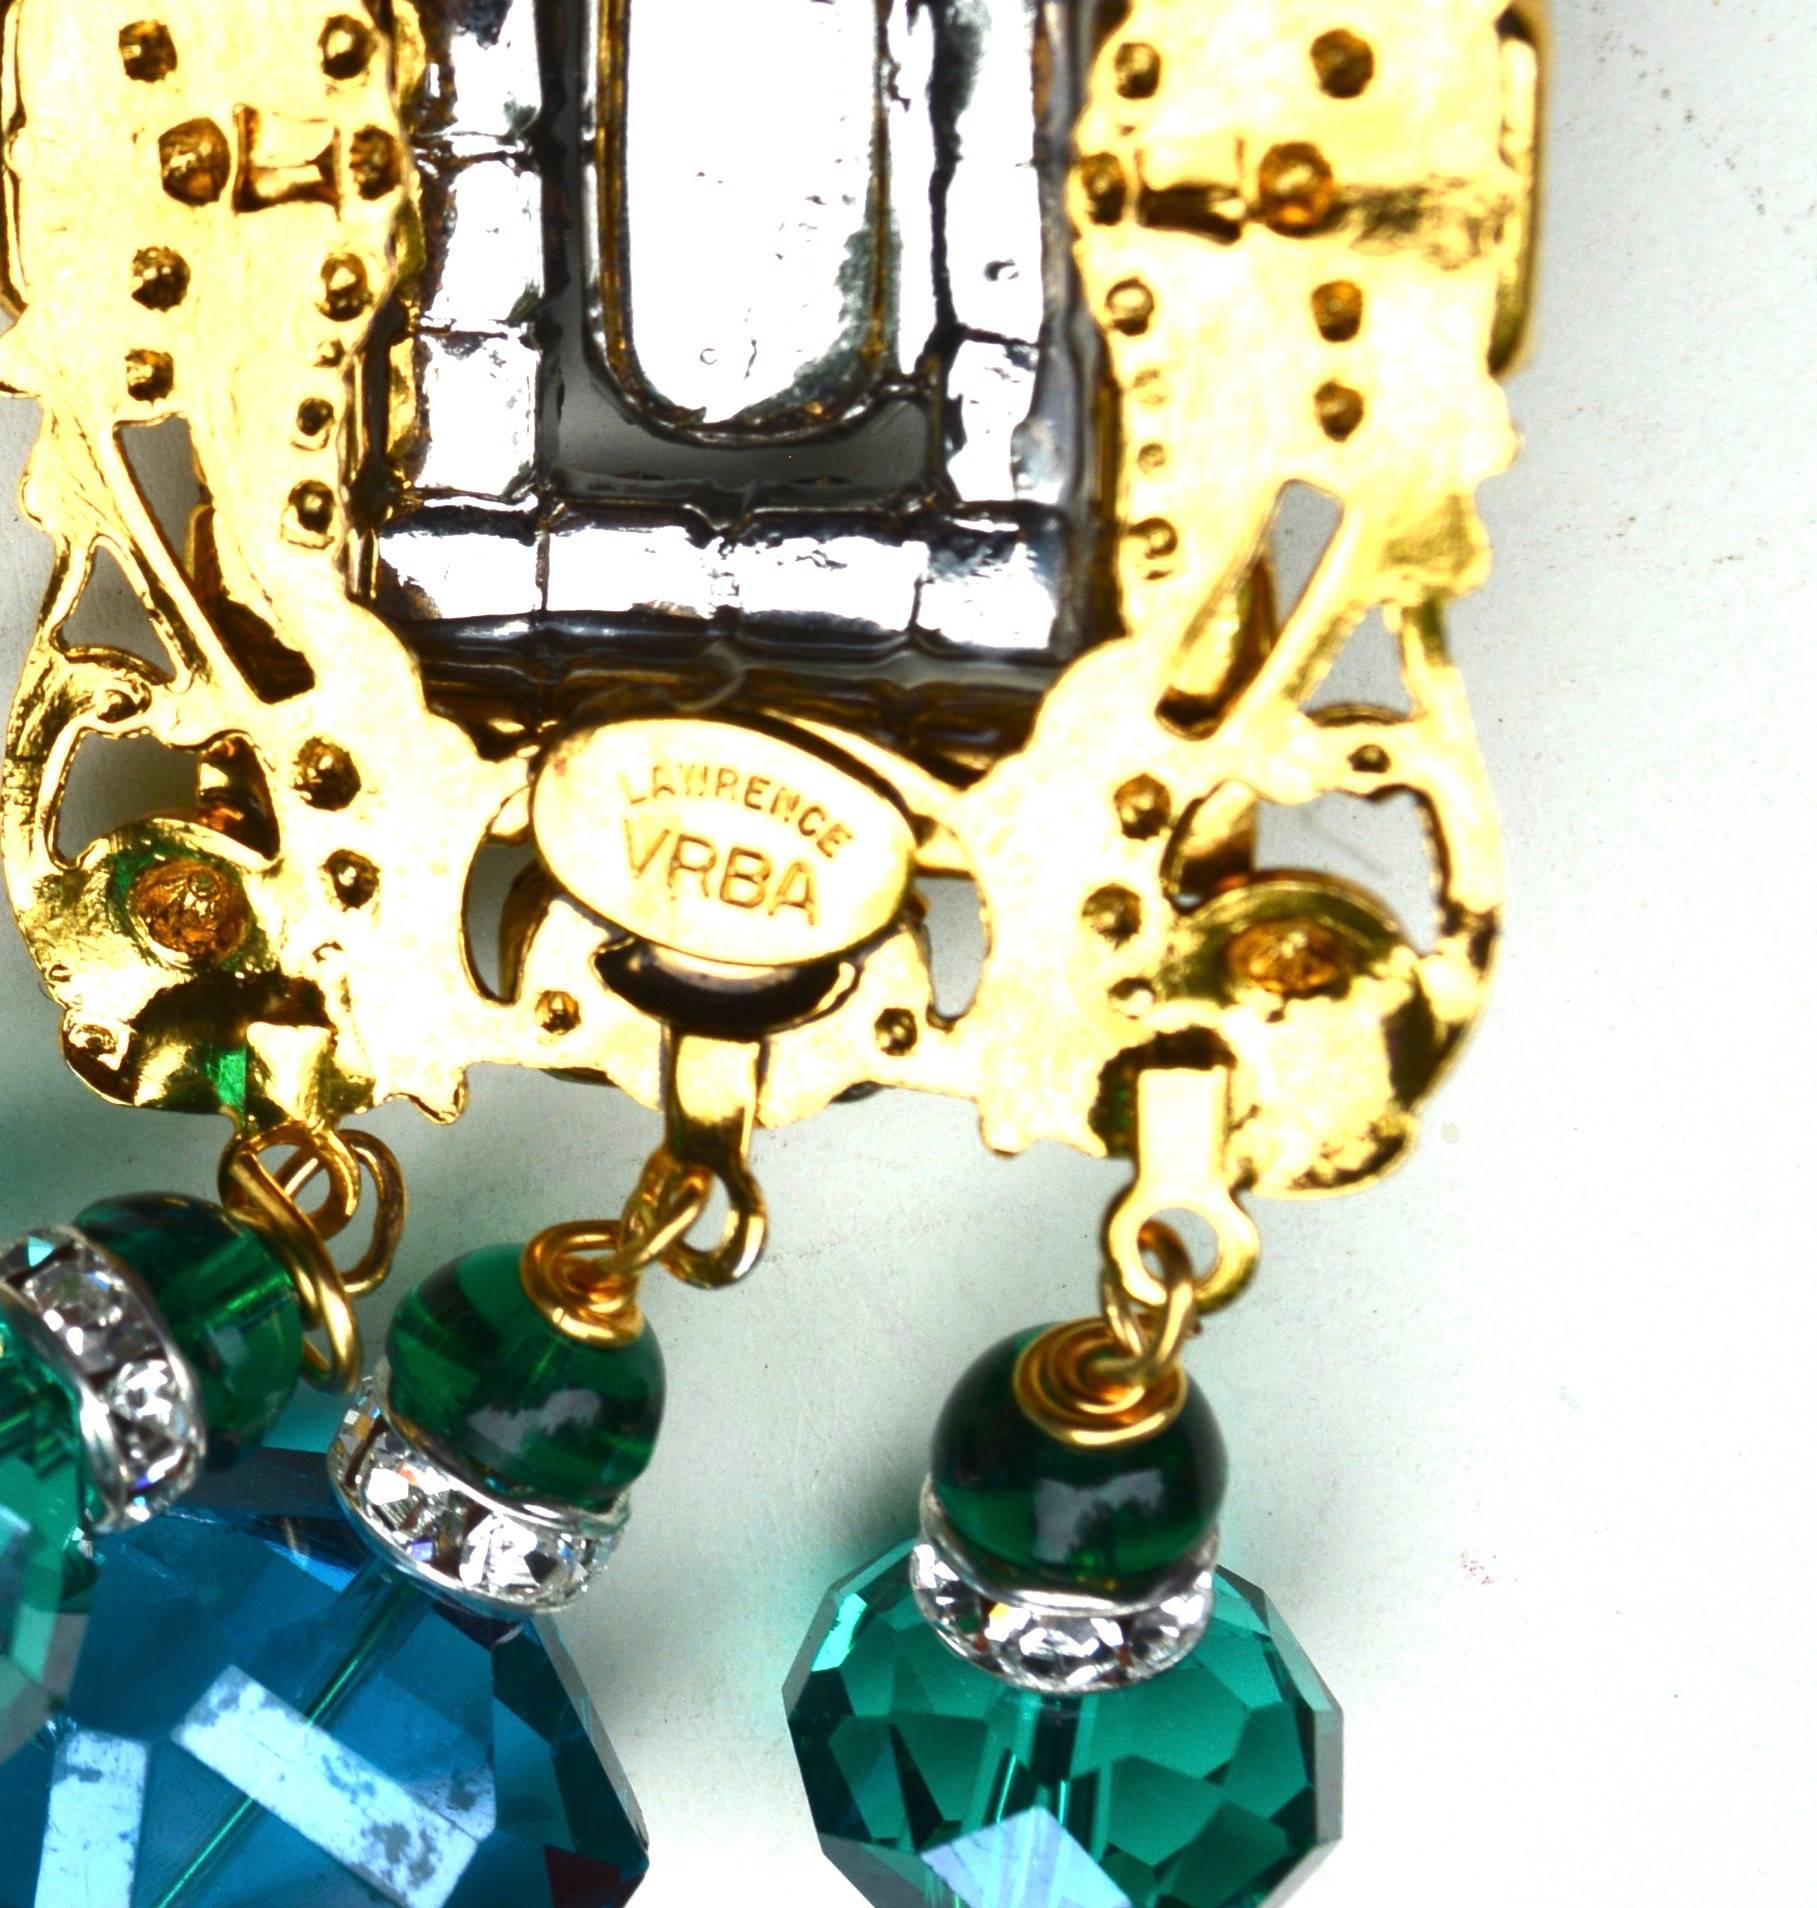 Glass Emerald and gilt metal filigree earrings in an oversized style. Handmade with lots of detail, signed. One bottom stone is set a bit off due to hand made aspects. 4.5